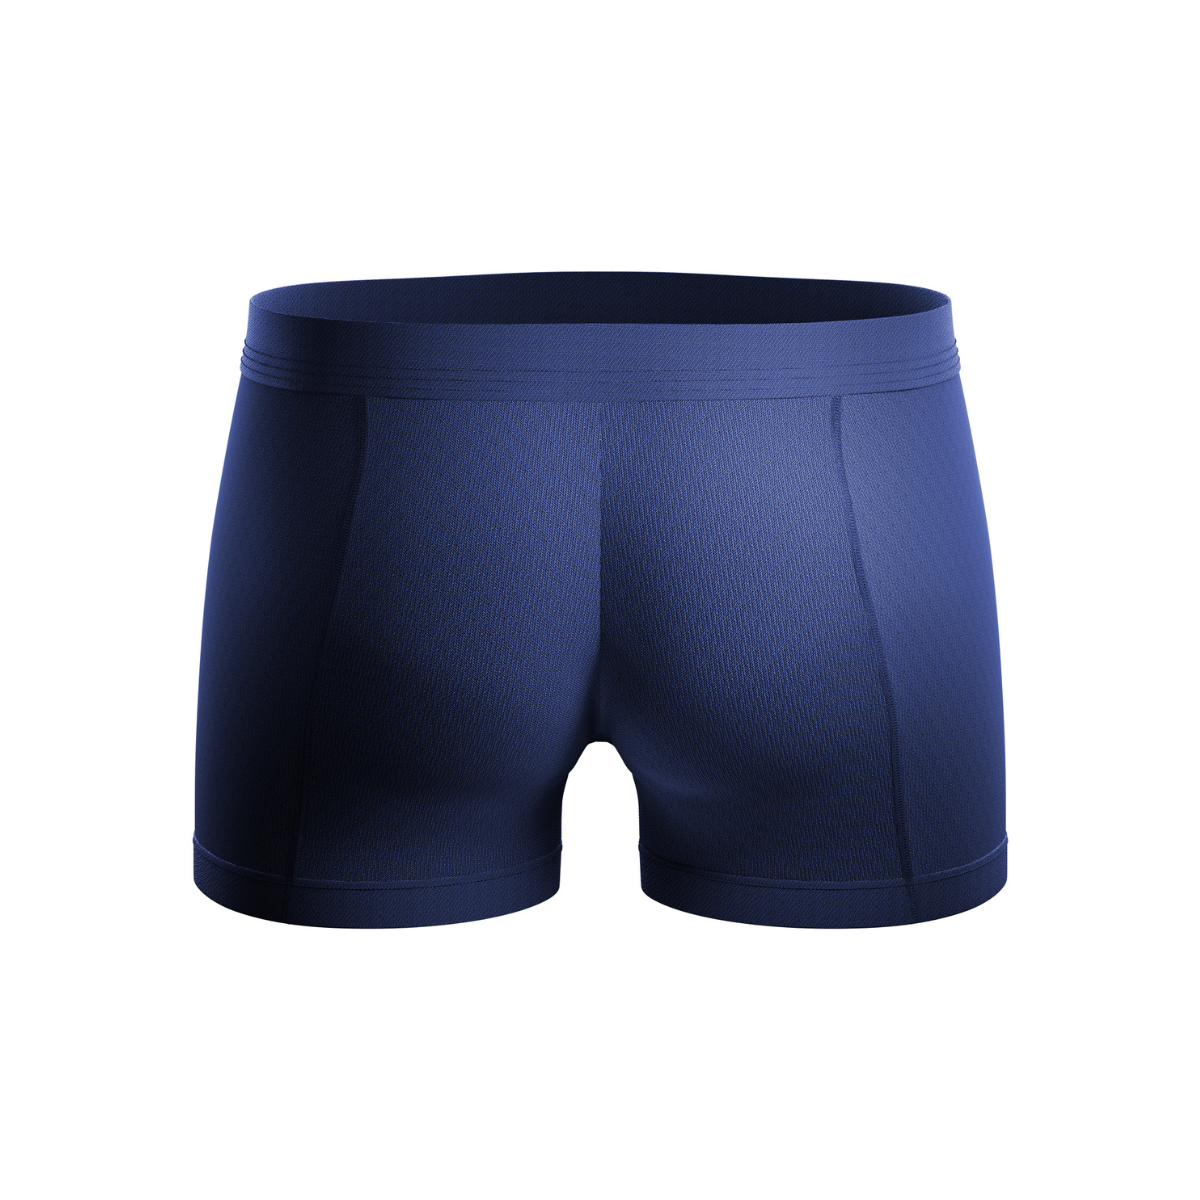 BOXR | The Classic Bamboe Boxers 8-Pack Blauw